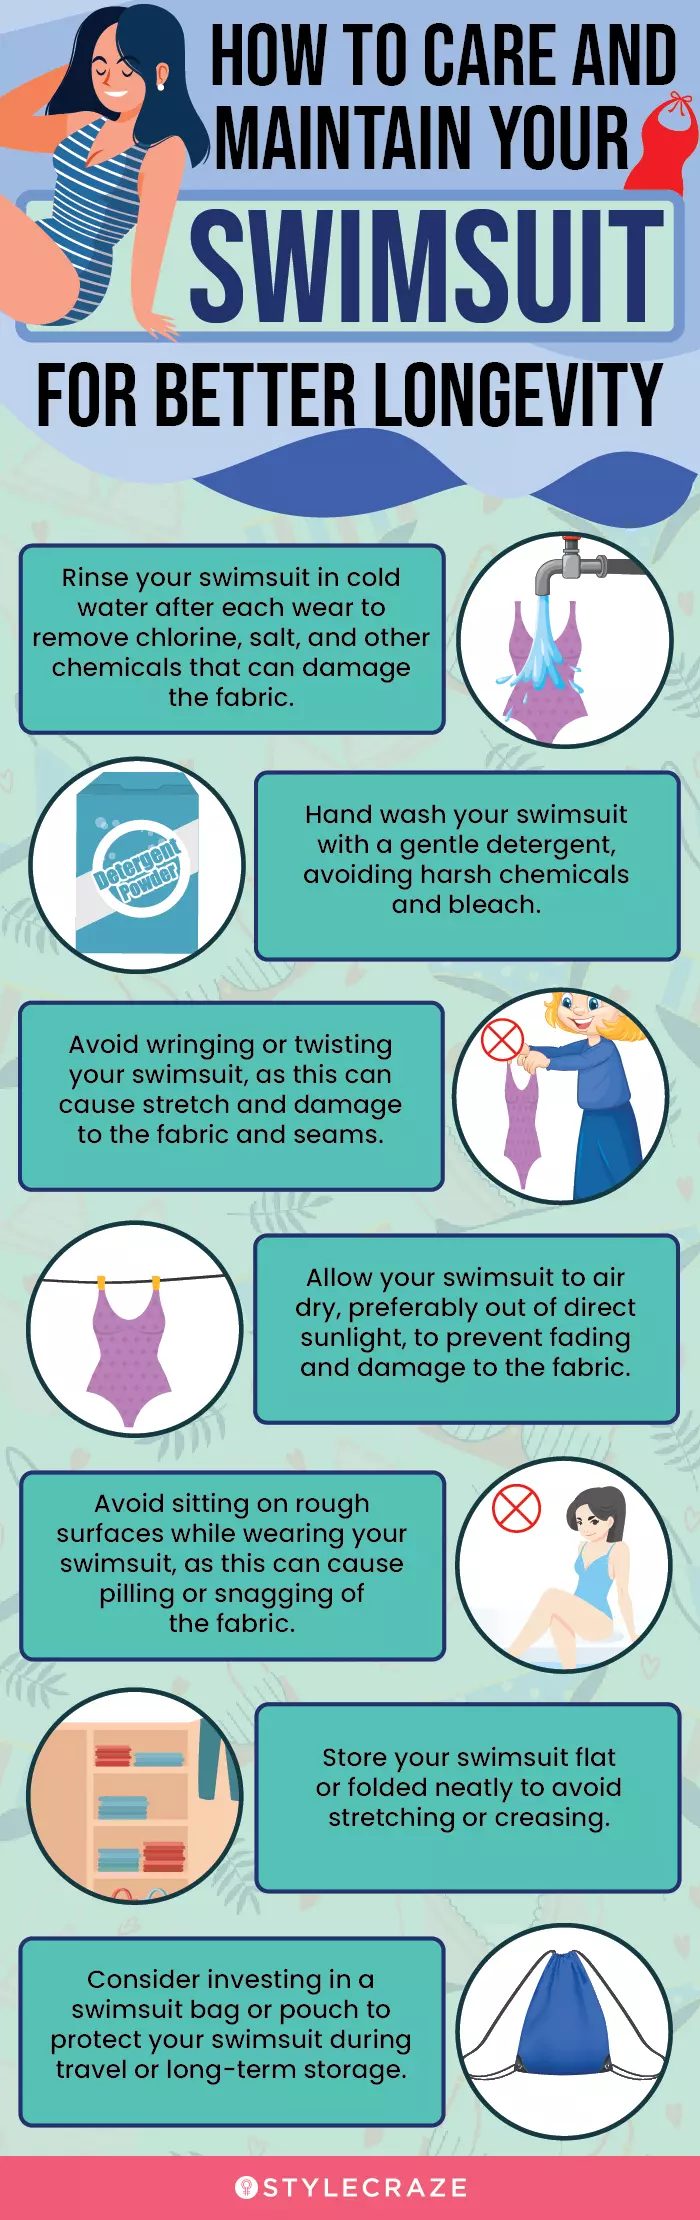 How To Care And Maintain Your Swimsuit For Longevity (infographic)